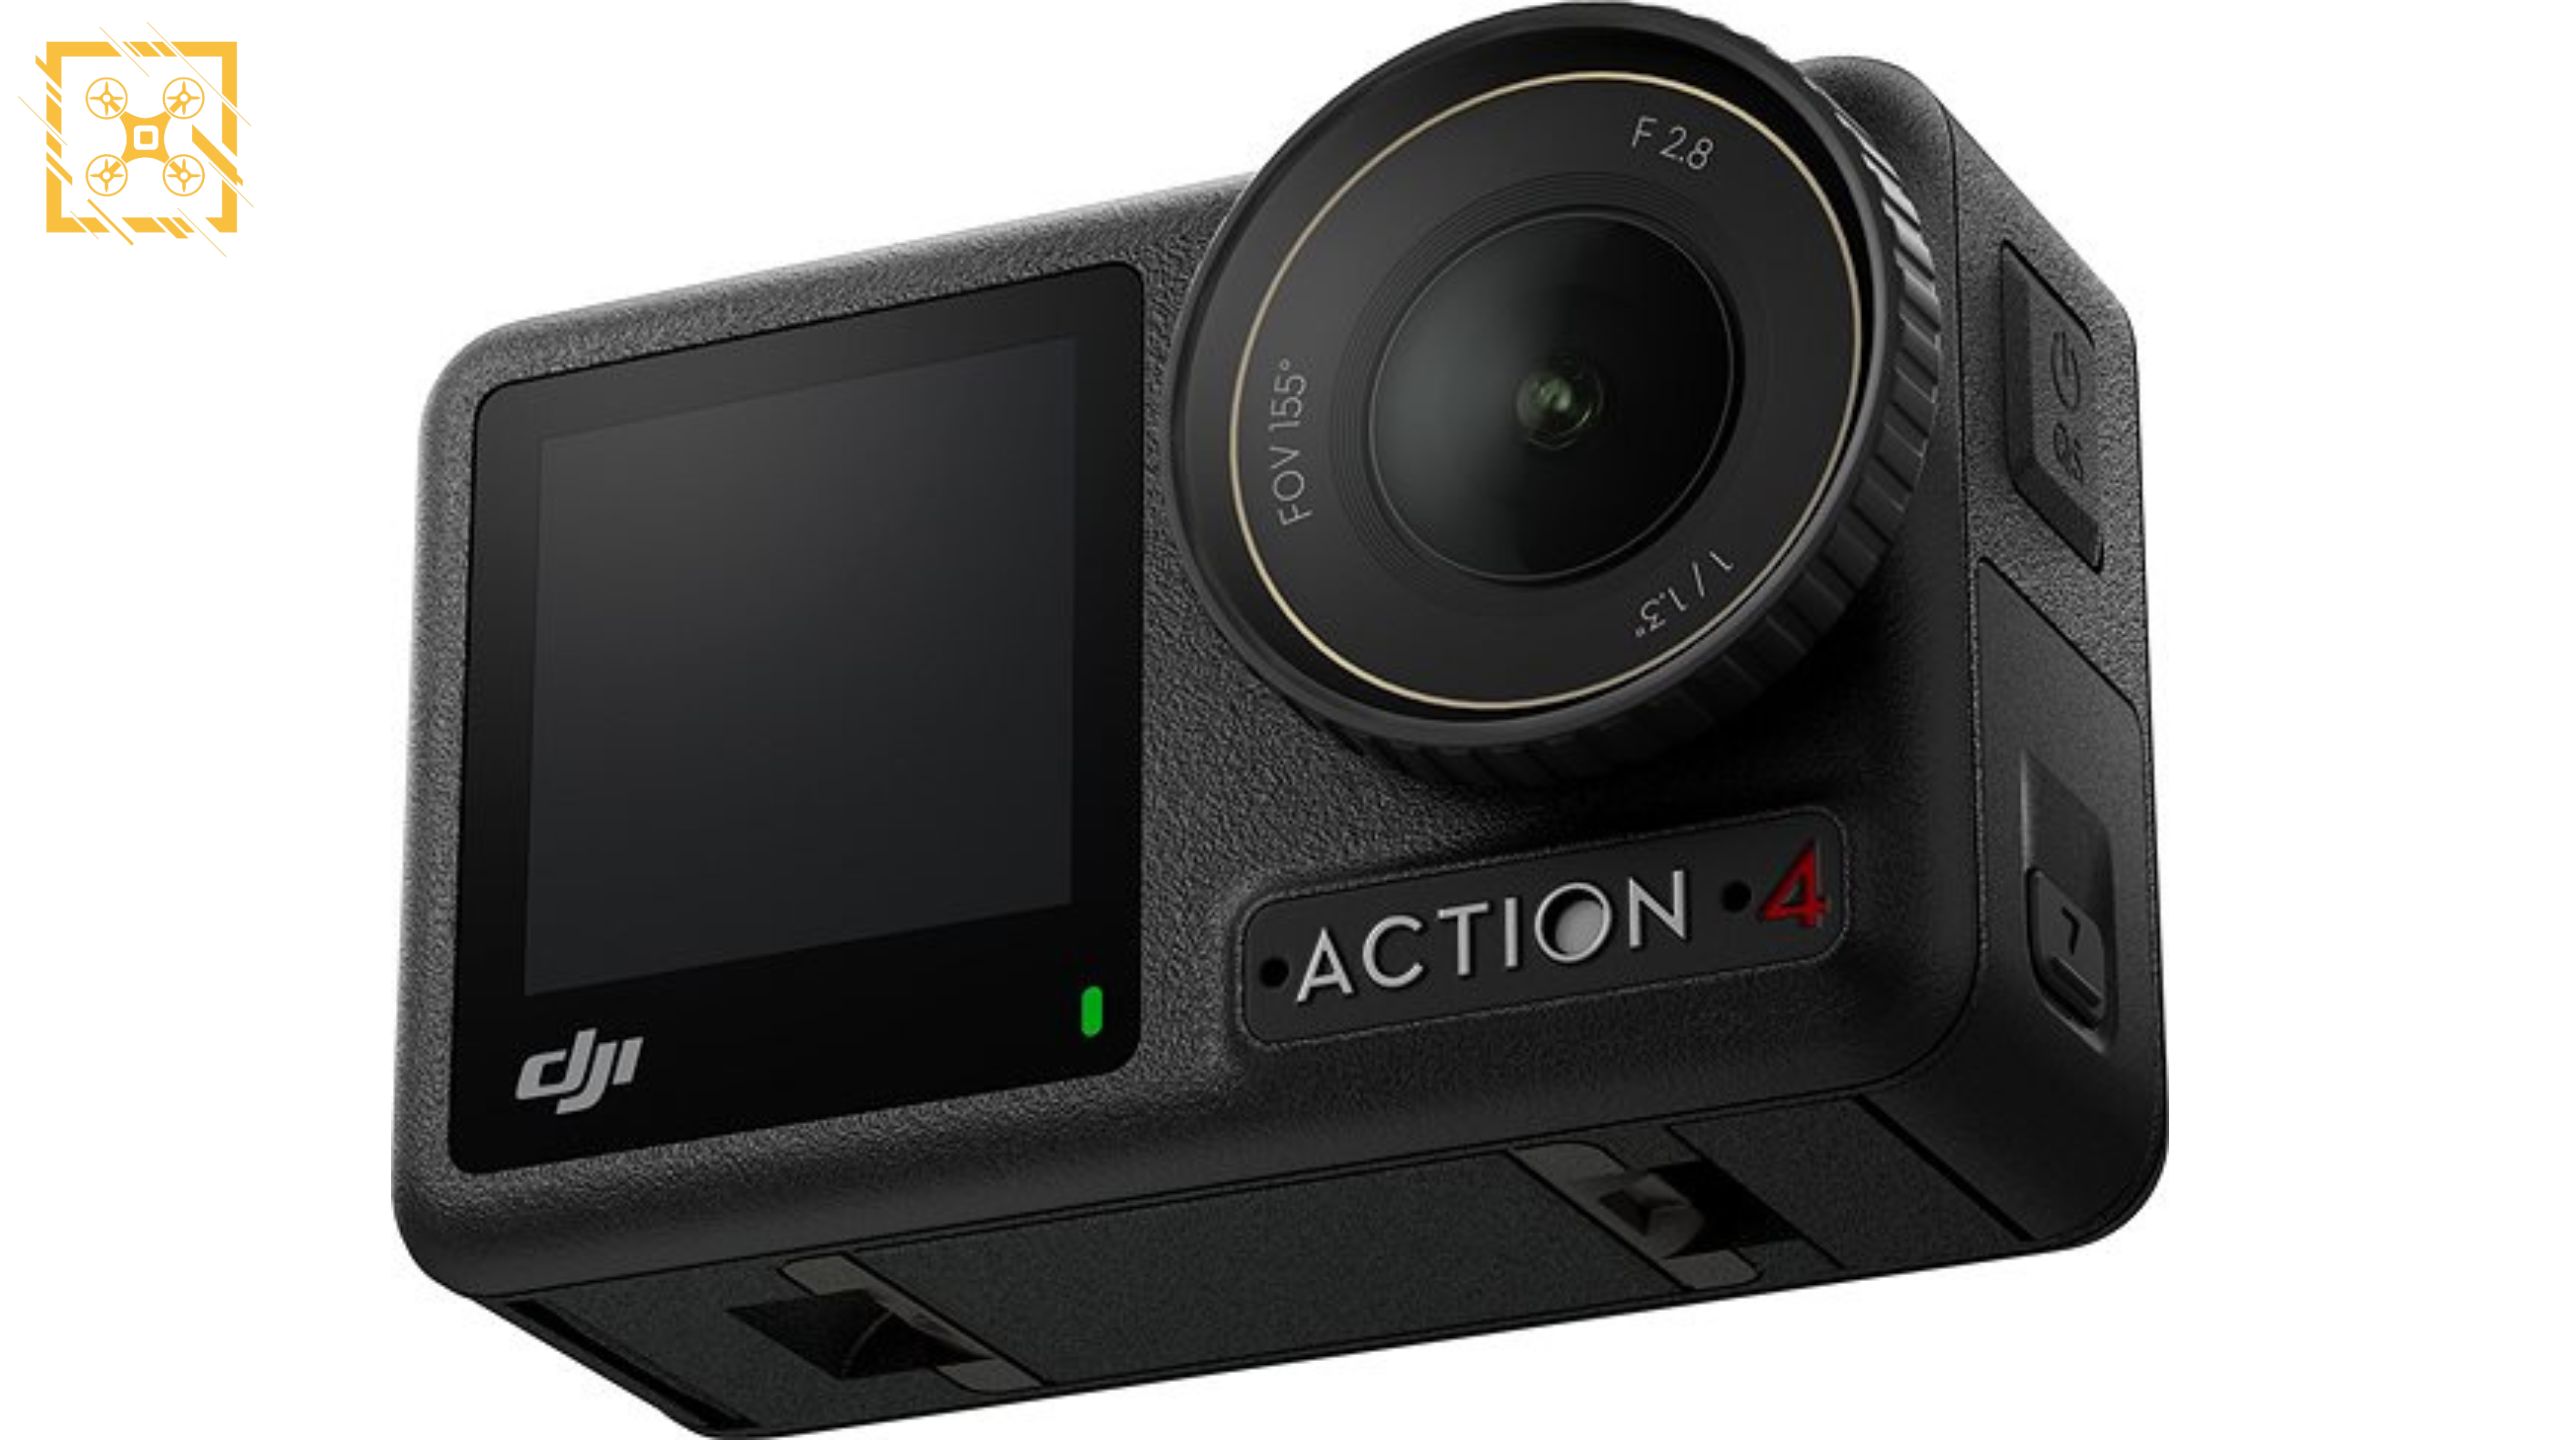 DJI OSMO Action 4 specs leak ahead of July 25 release, indicating